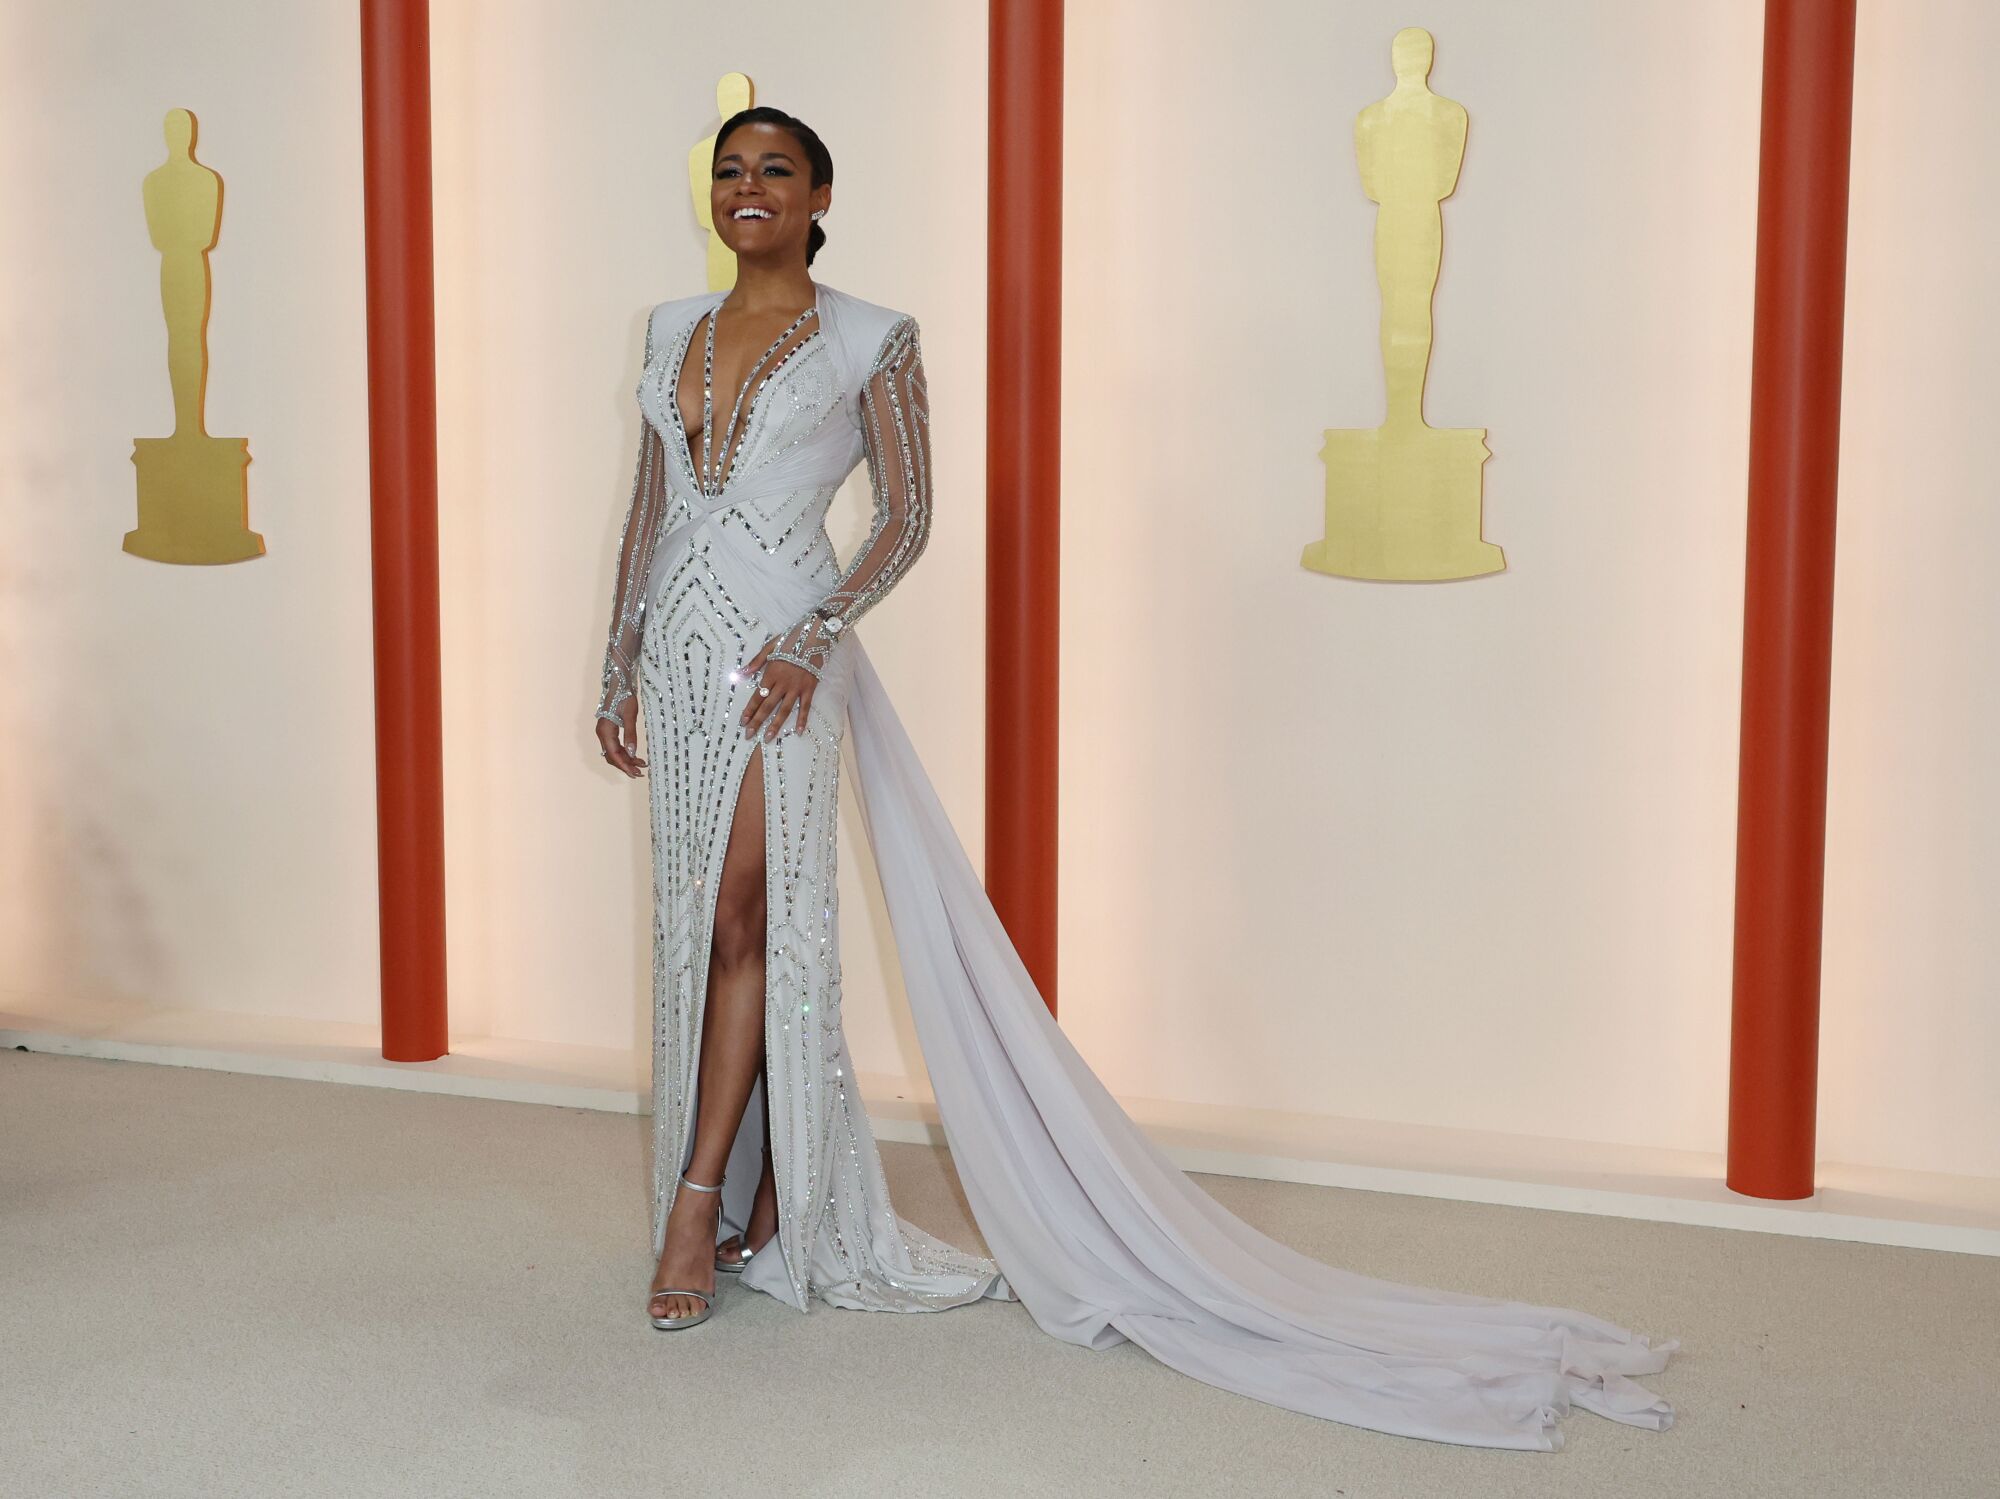 Ariana DeBose in a sparkling white gown studded in an Art Deco geometric pattern with silver studs.